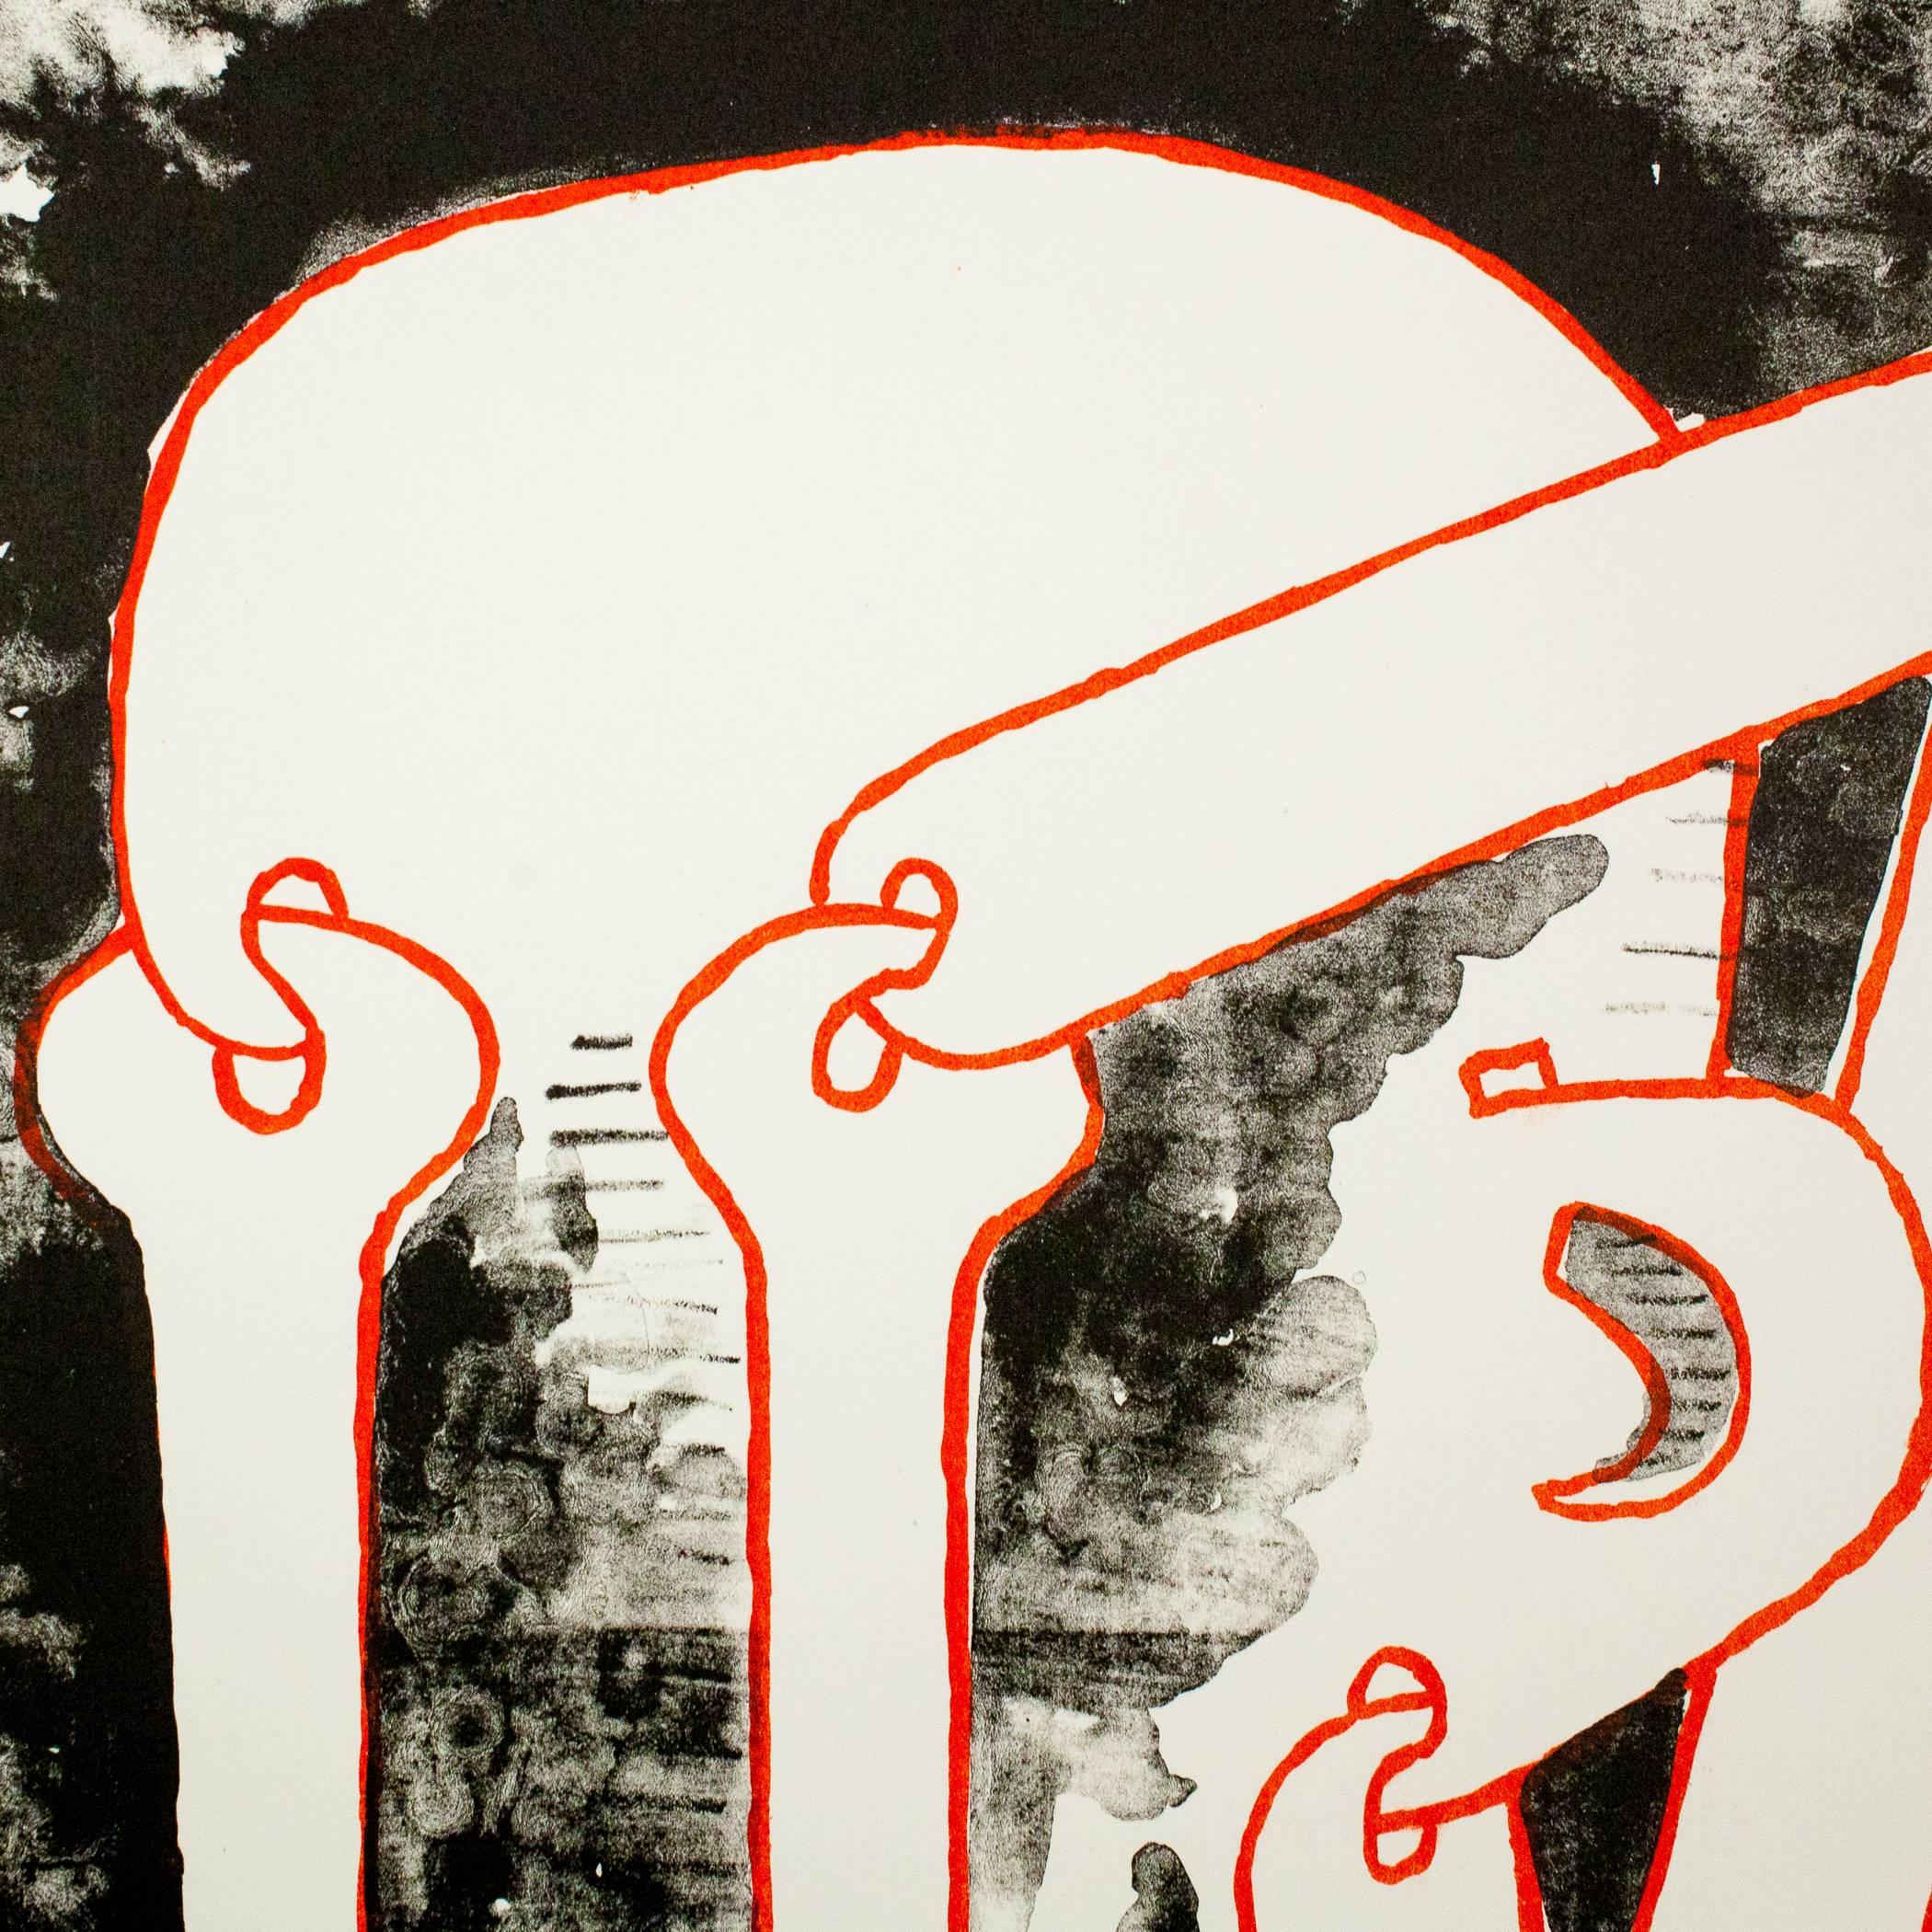 Caviar20 has a particular interest in sculptors who also turn a hand at printmaking. 

So it is no surprise to find another fine example of a Sorel Etrog multiple on our site. 

The motif of "links" first appears in his drawing in 1964